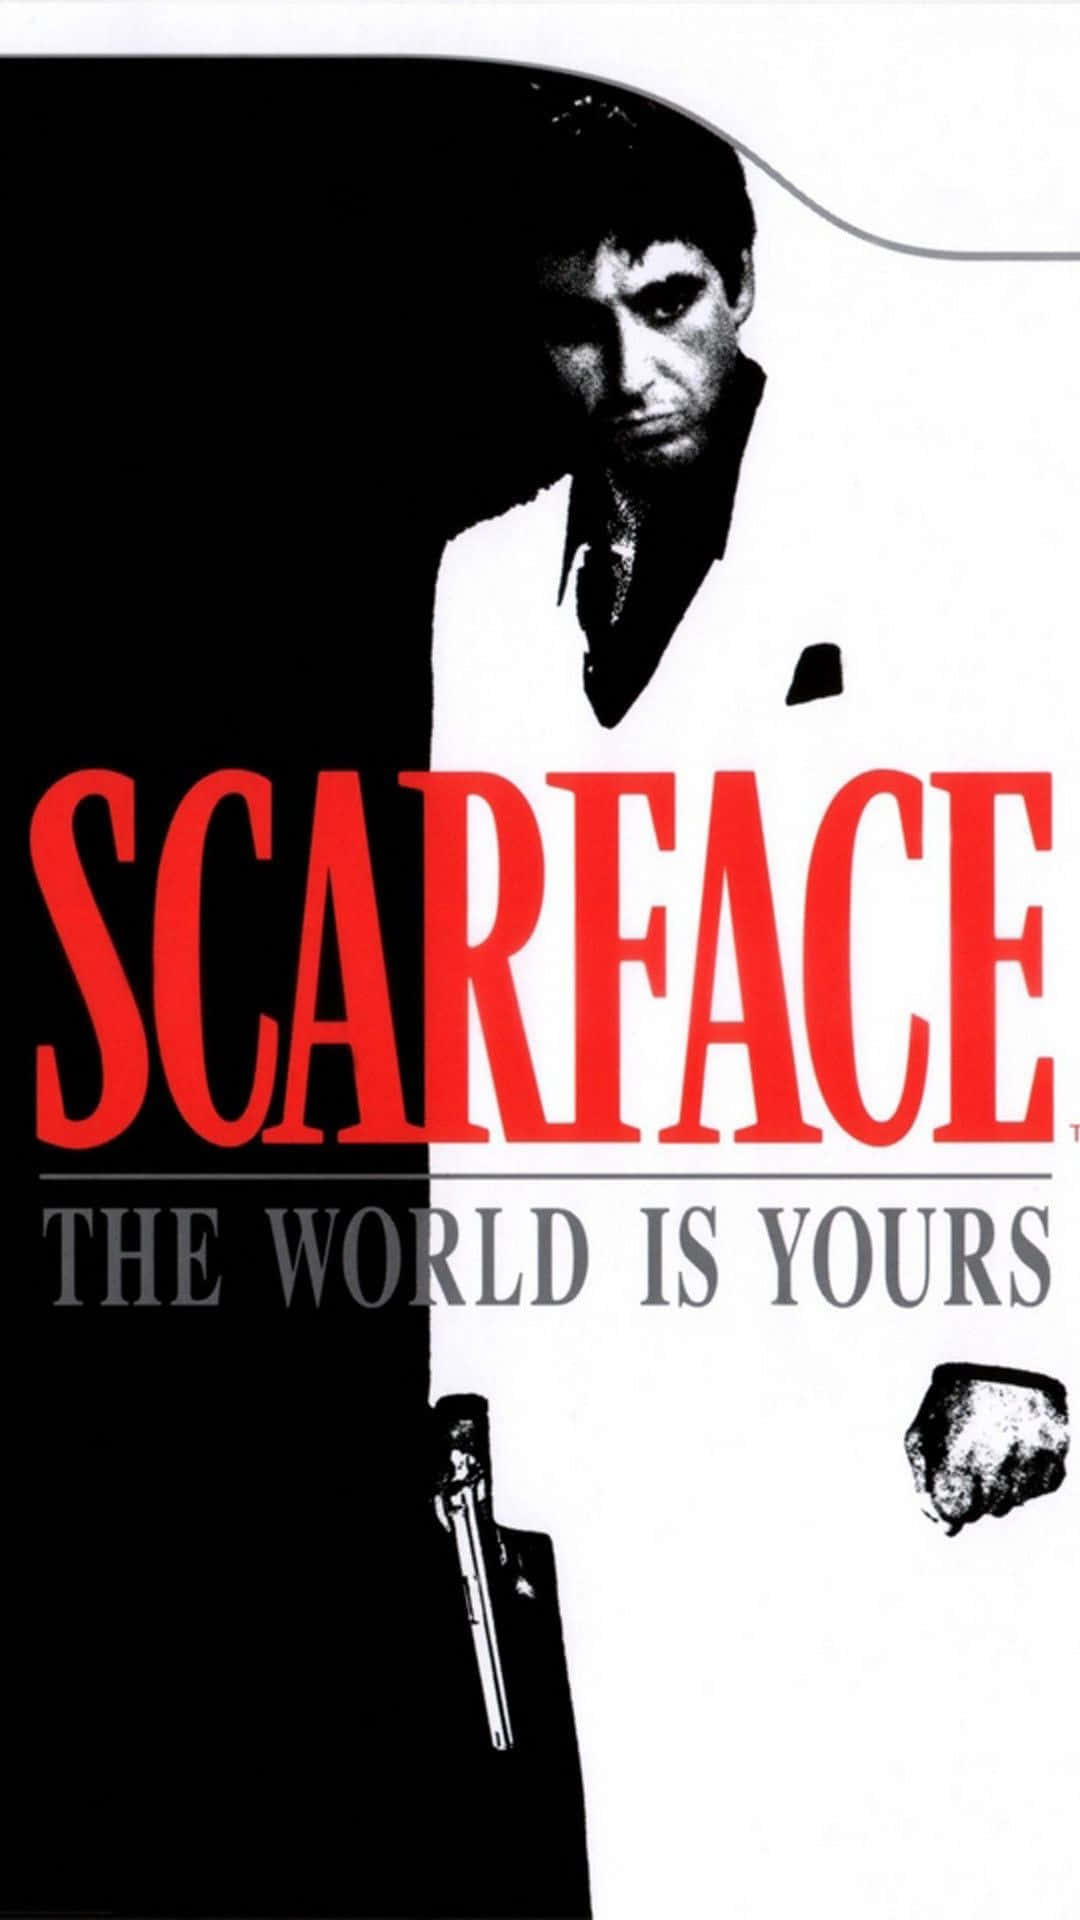 Free Scarface Iphone Wallpaper Downloads, [100+] Scarface Iphone Wallpapers  for FREE 